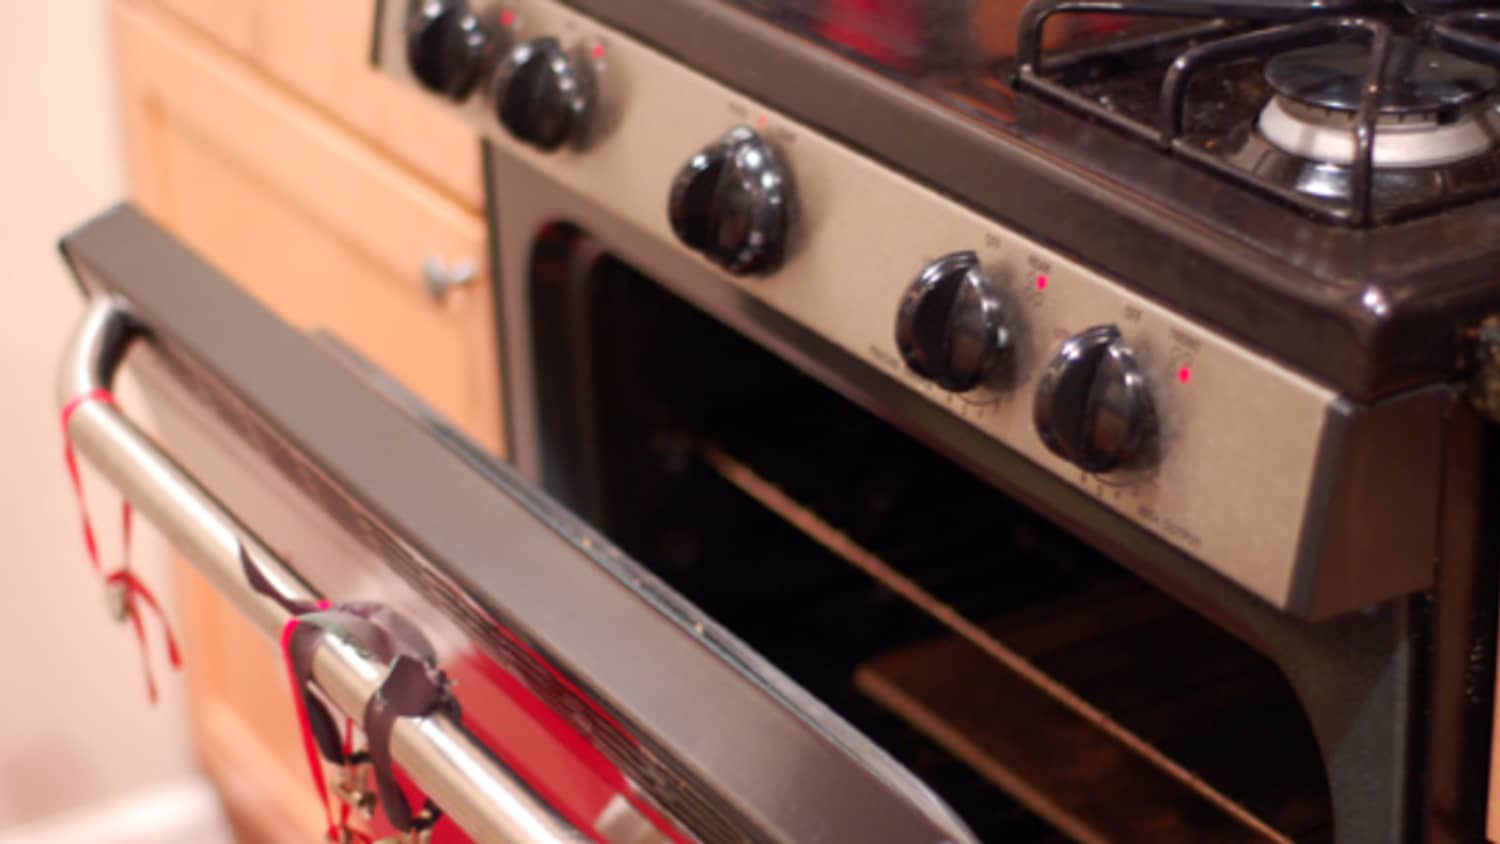 Should I Grill With The Door Open Or Closed? - CookersAndOvens Blog